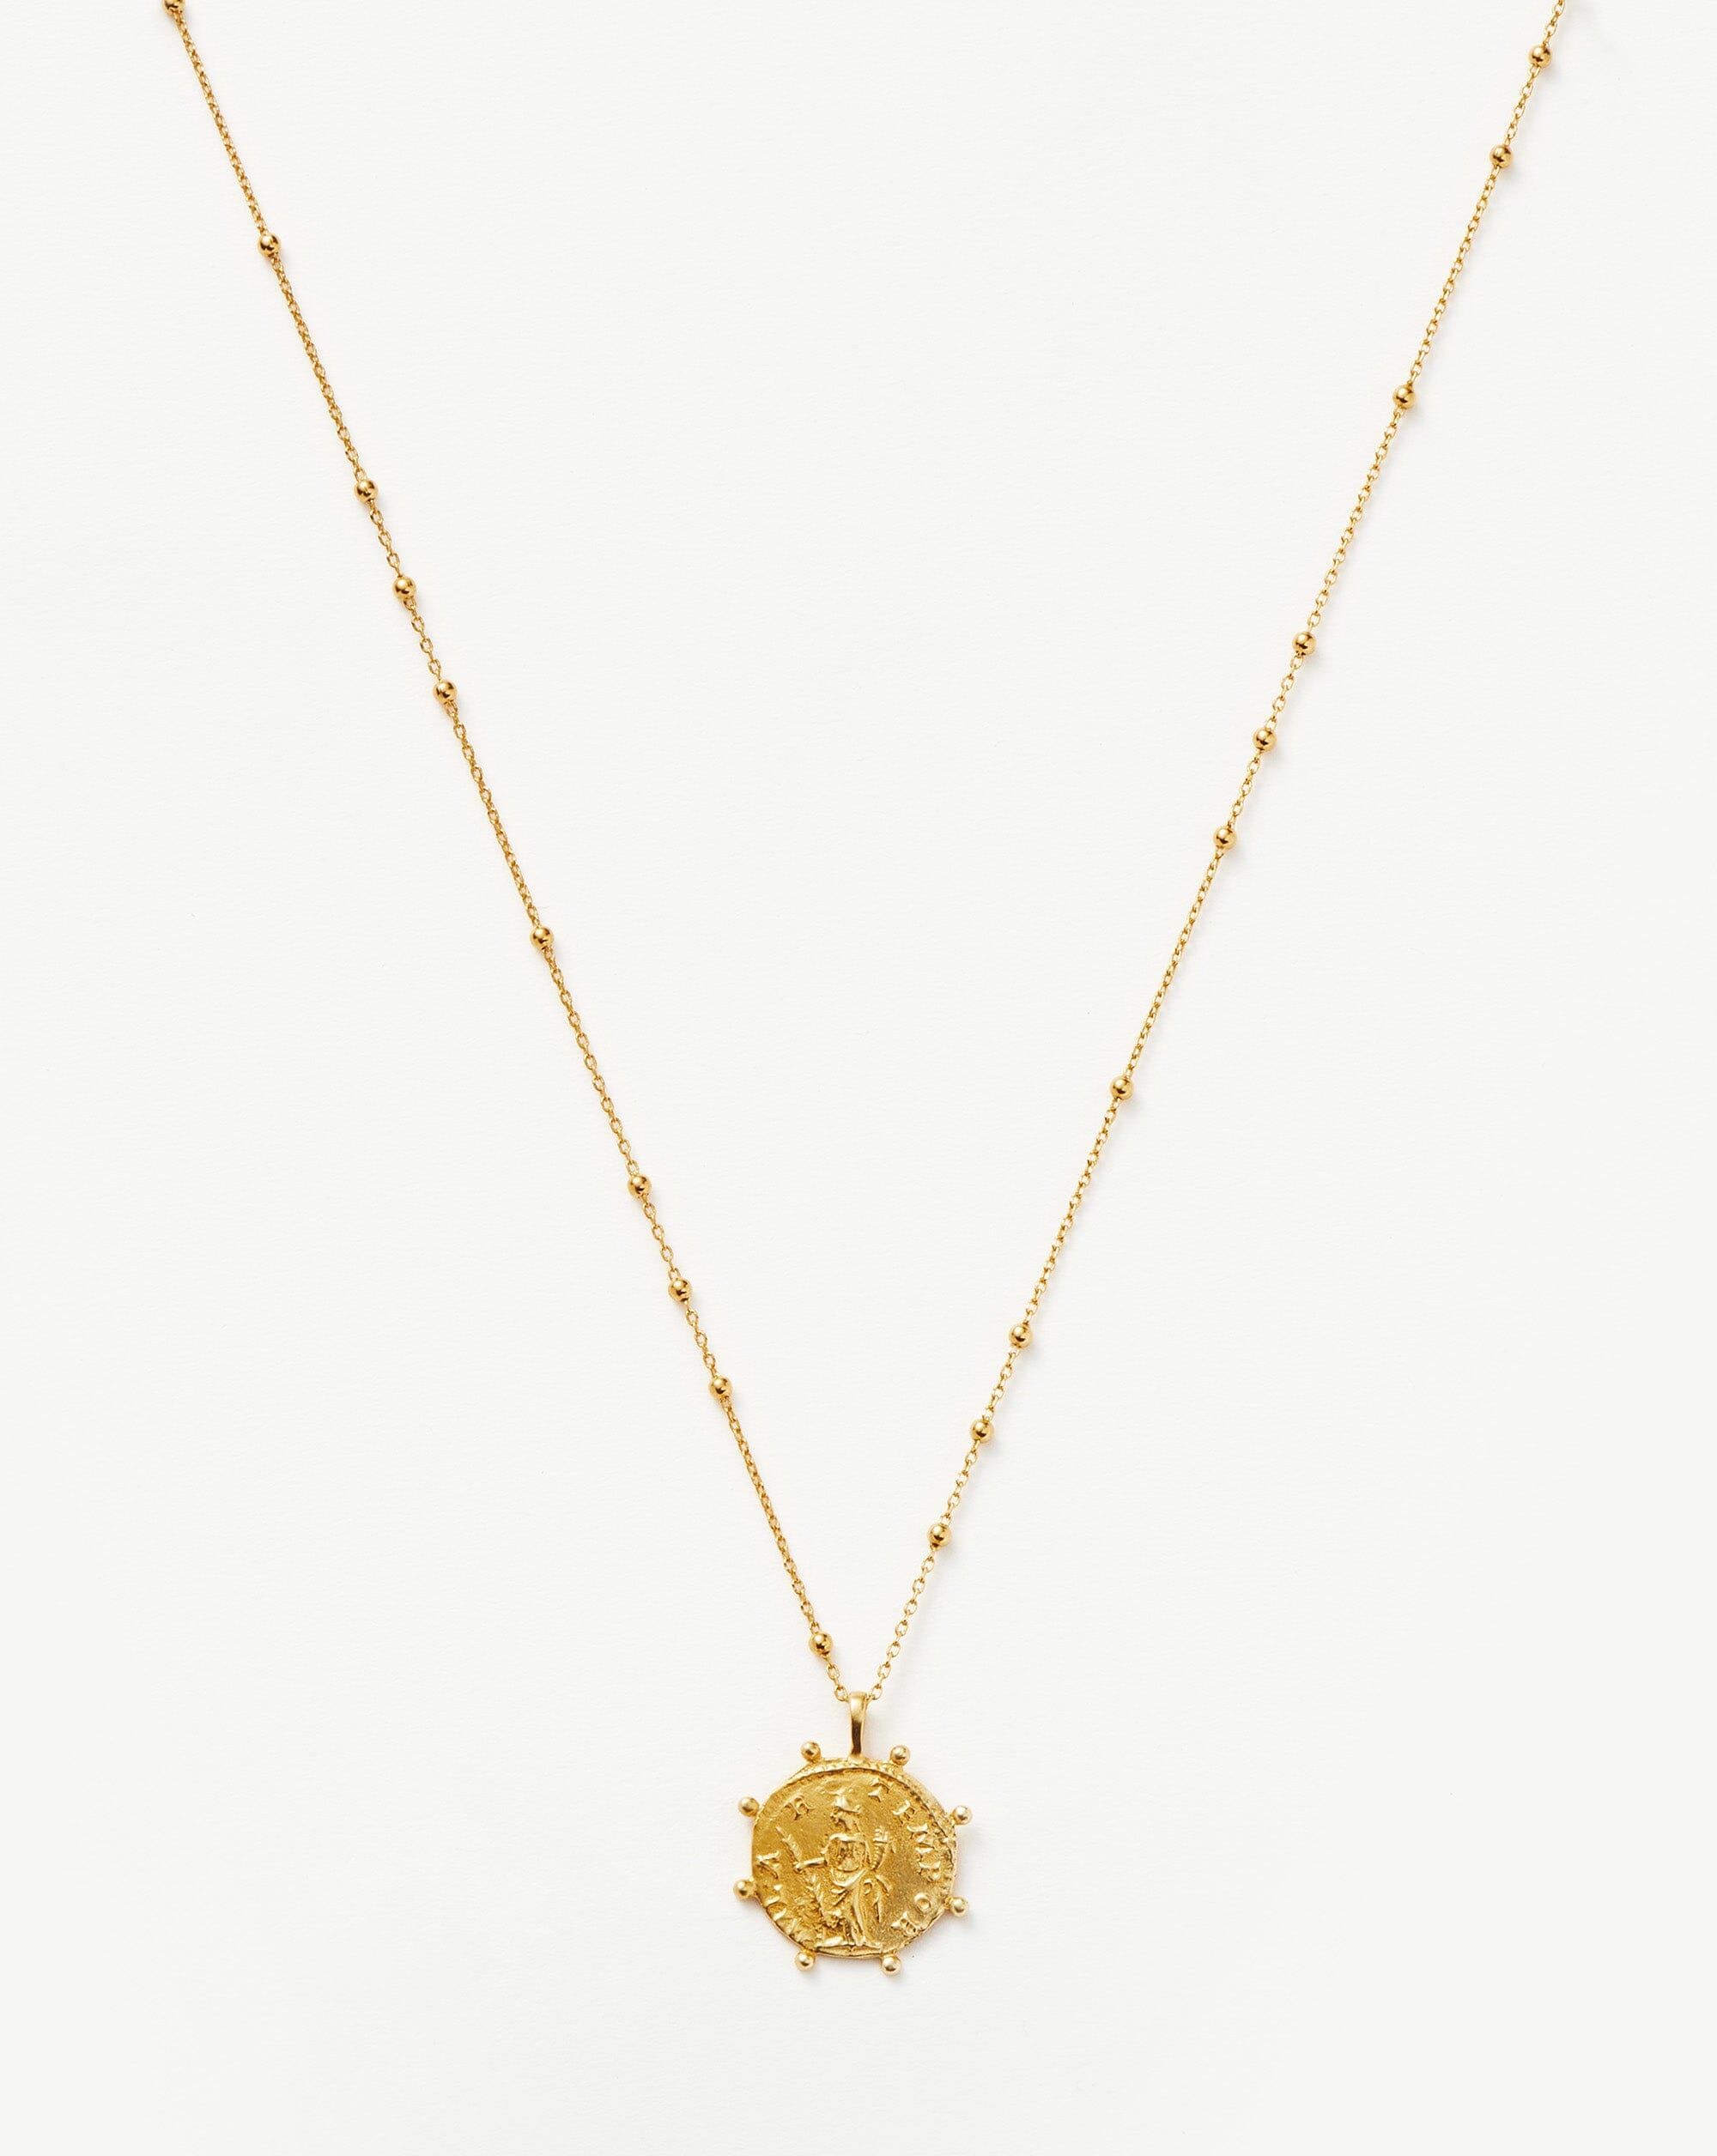 Lucy Williams Beaded Coin Necklace | Missoma